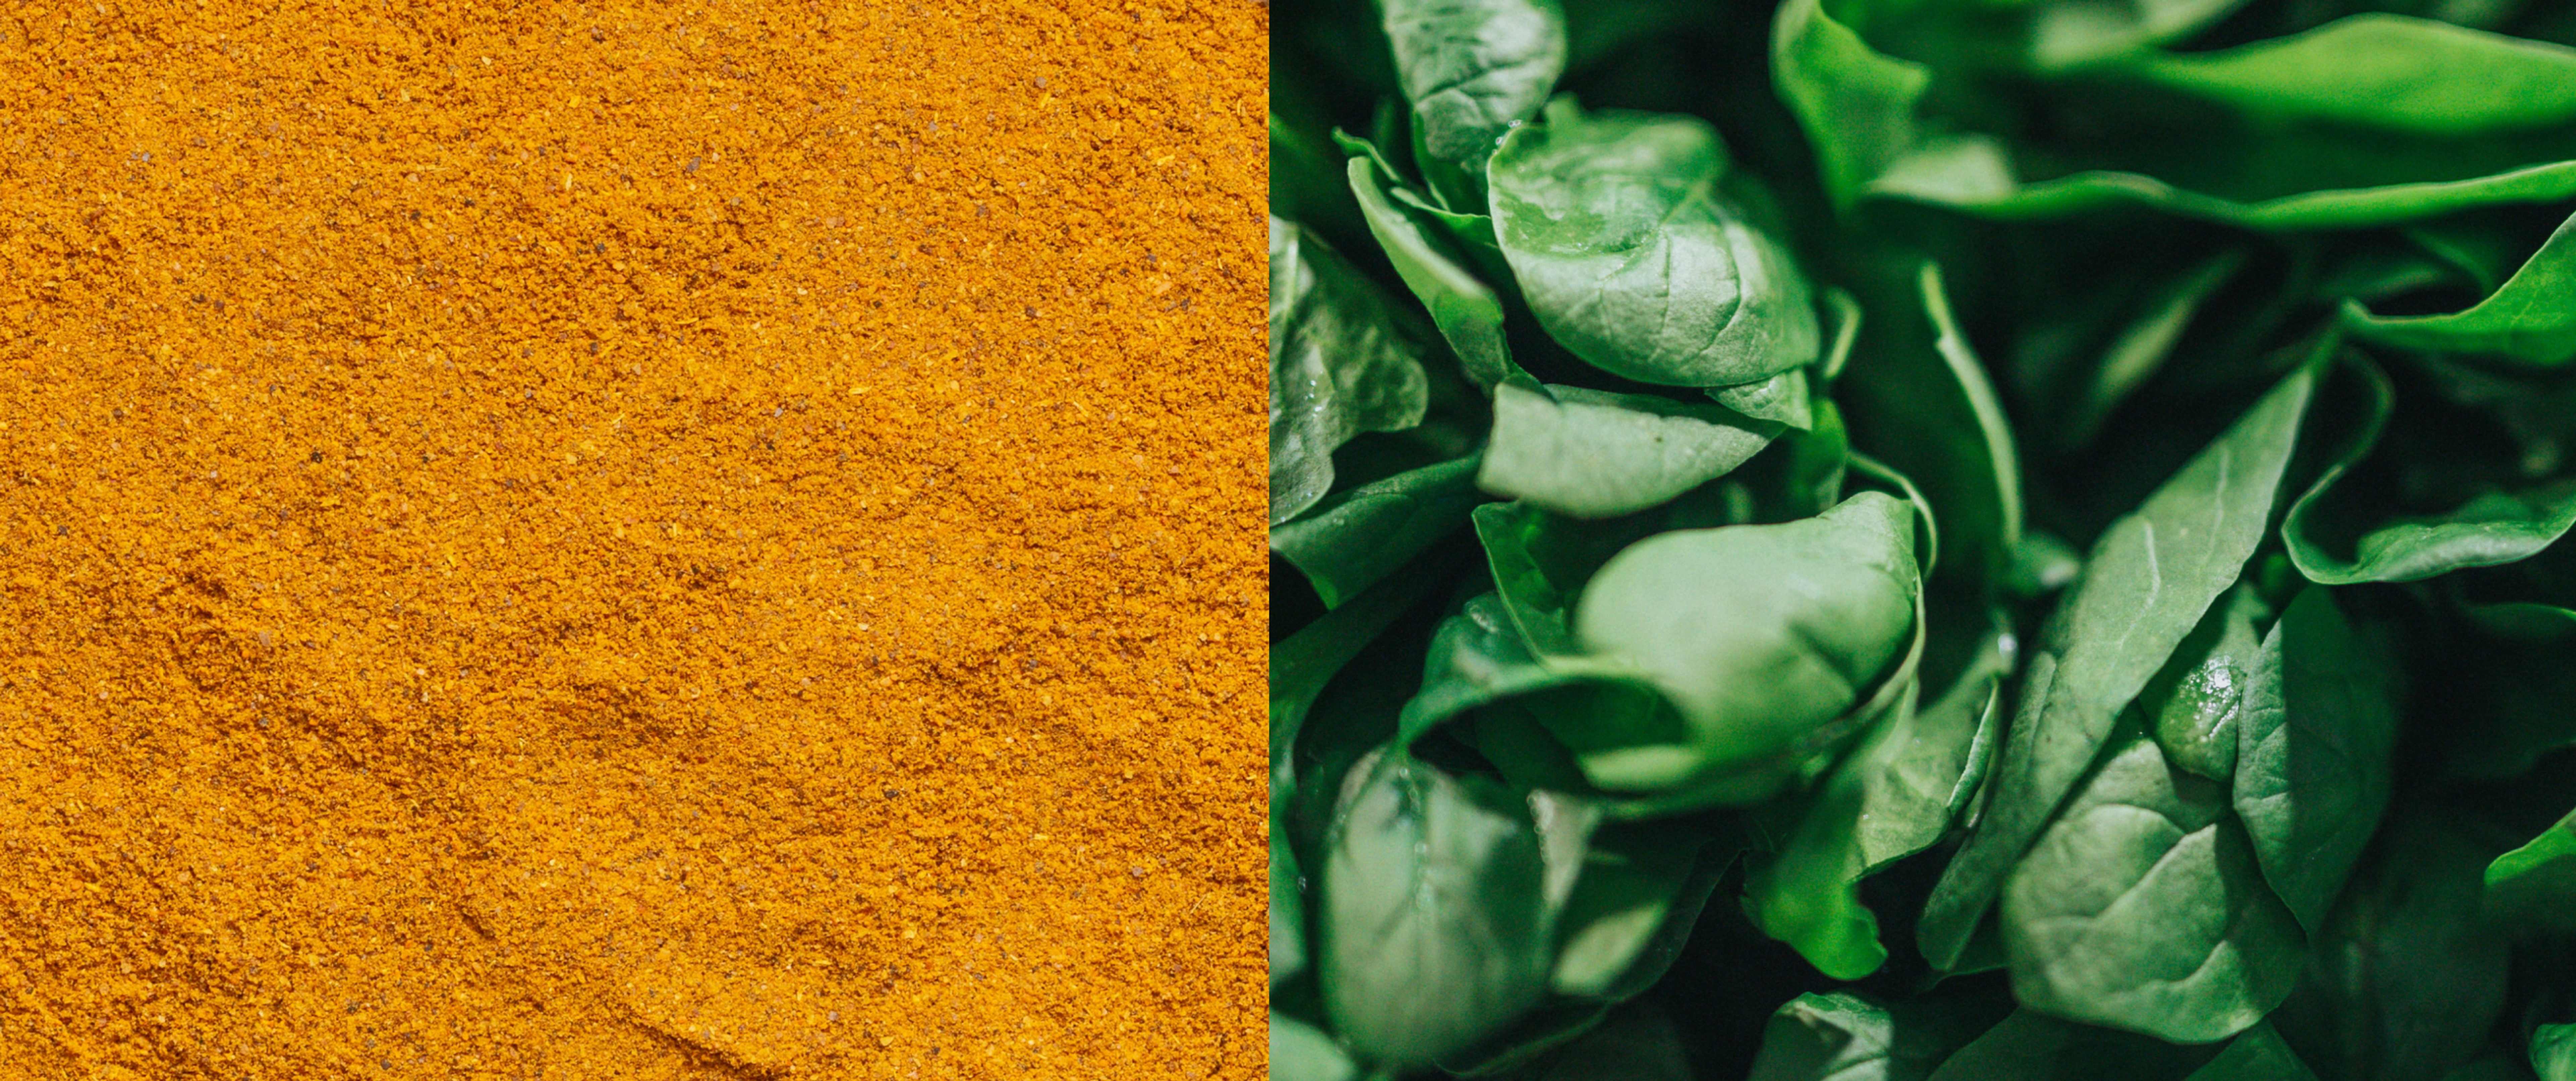 Turmeric and spinach. Foods rich in polyphenols